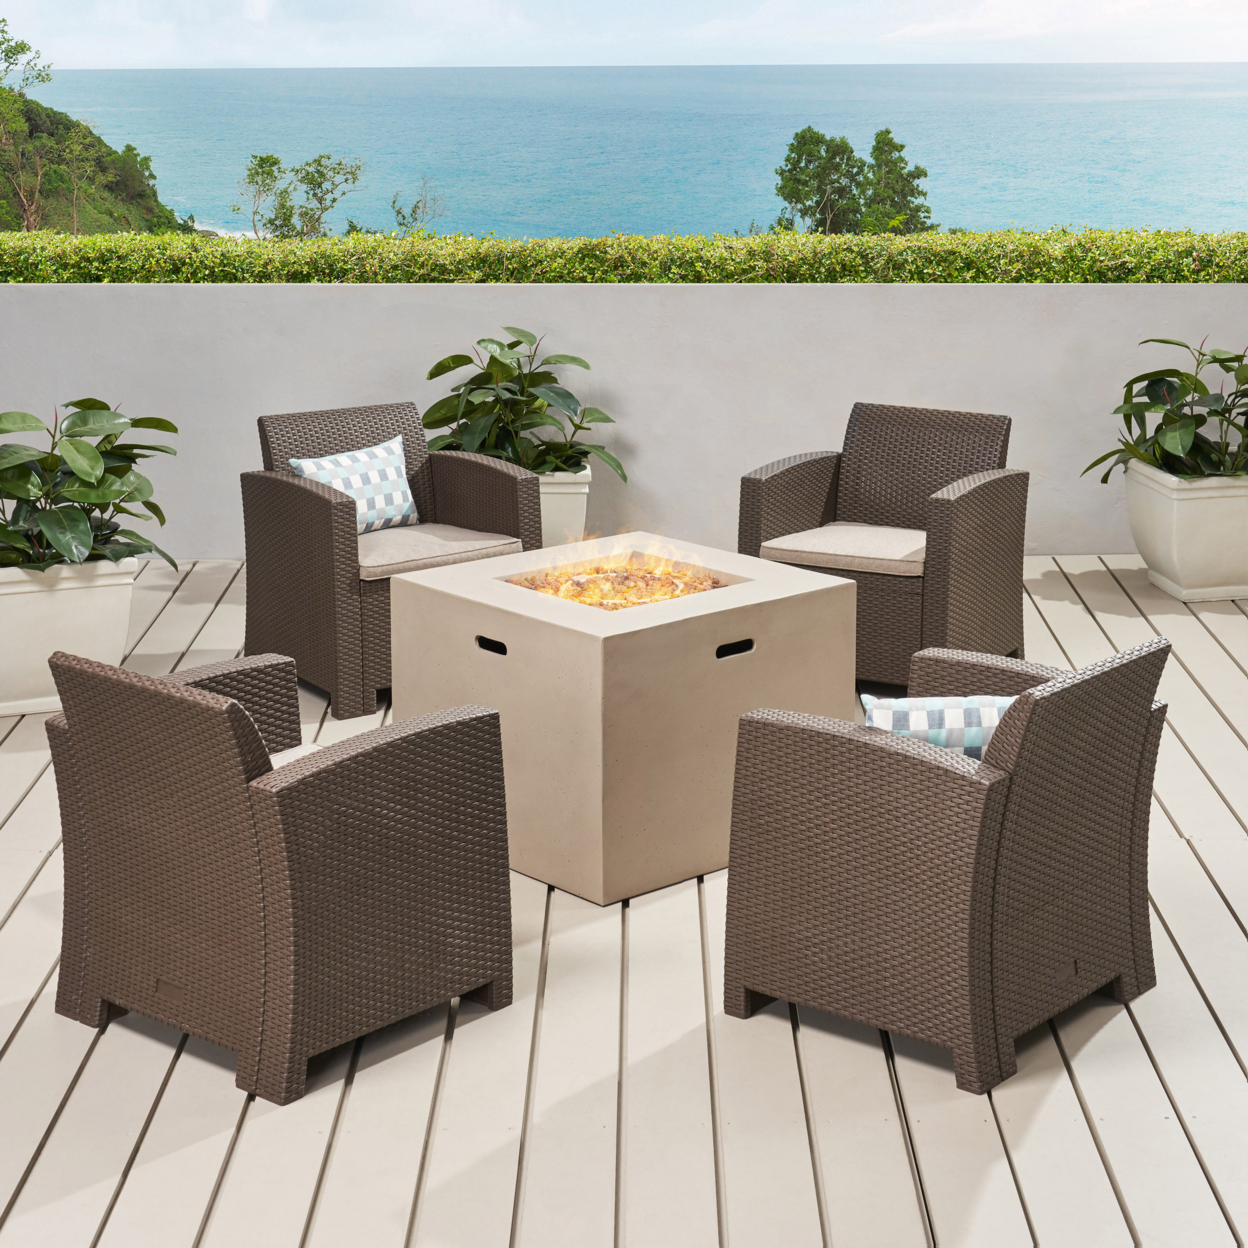 Houston Outdoor 4-Seater Wicker Print Chat Set With Propane Fire Pit - Charcoal + Light Gray + Dark Gray